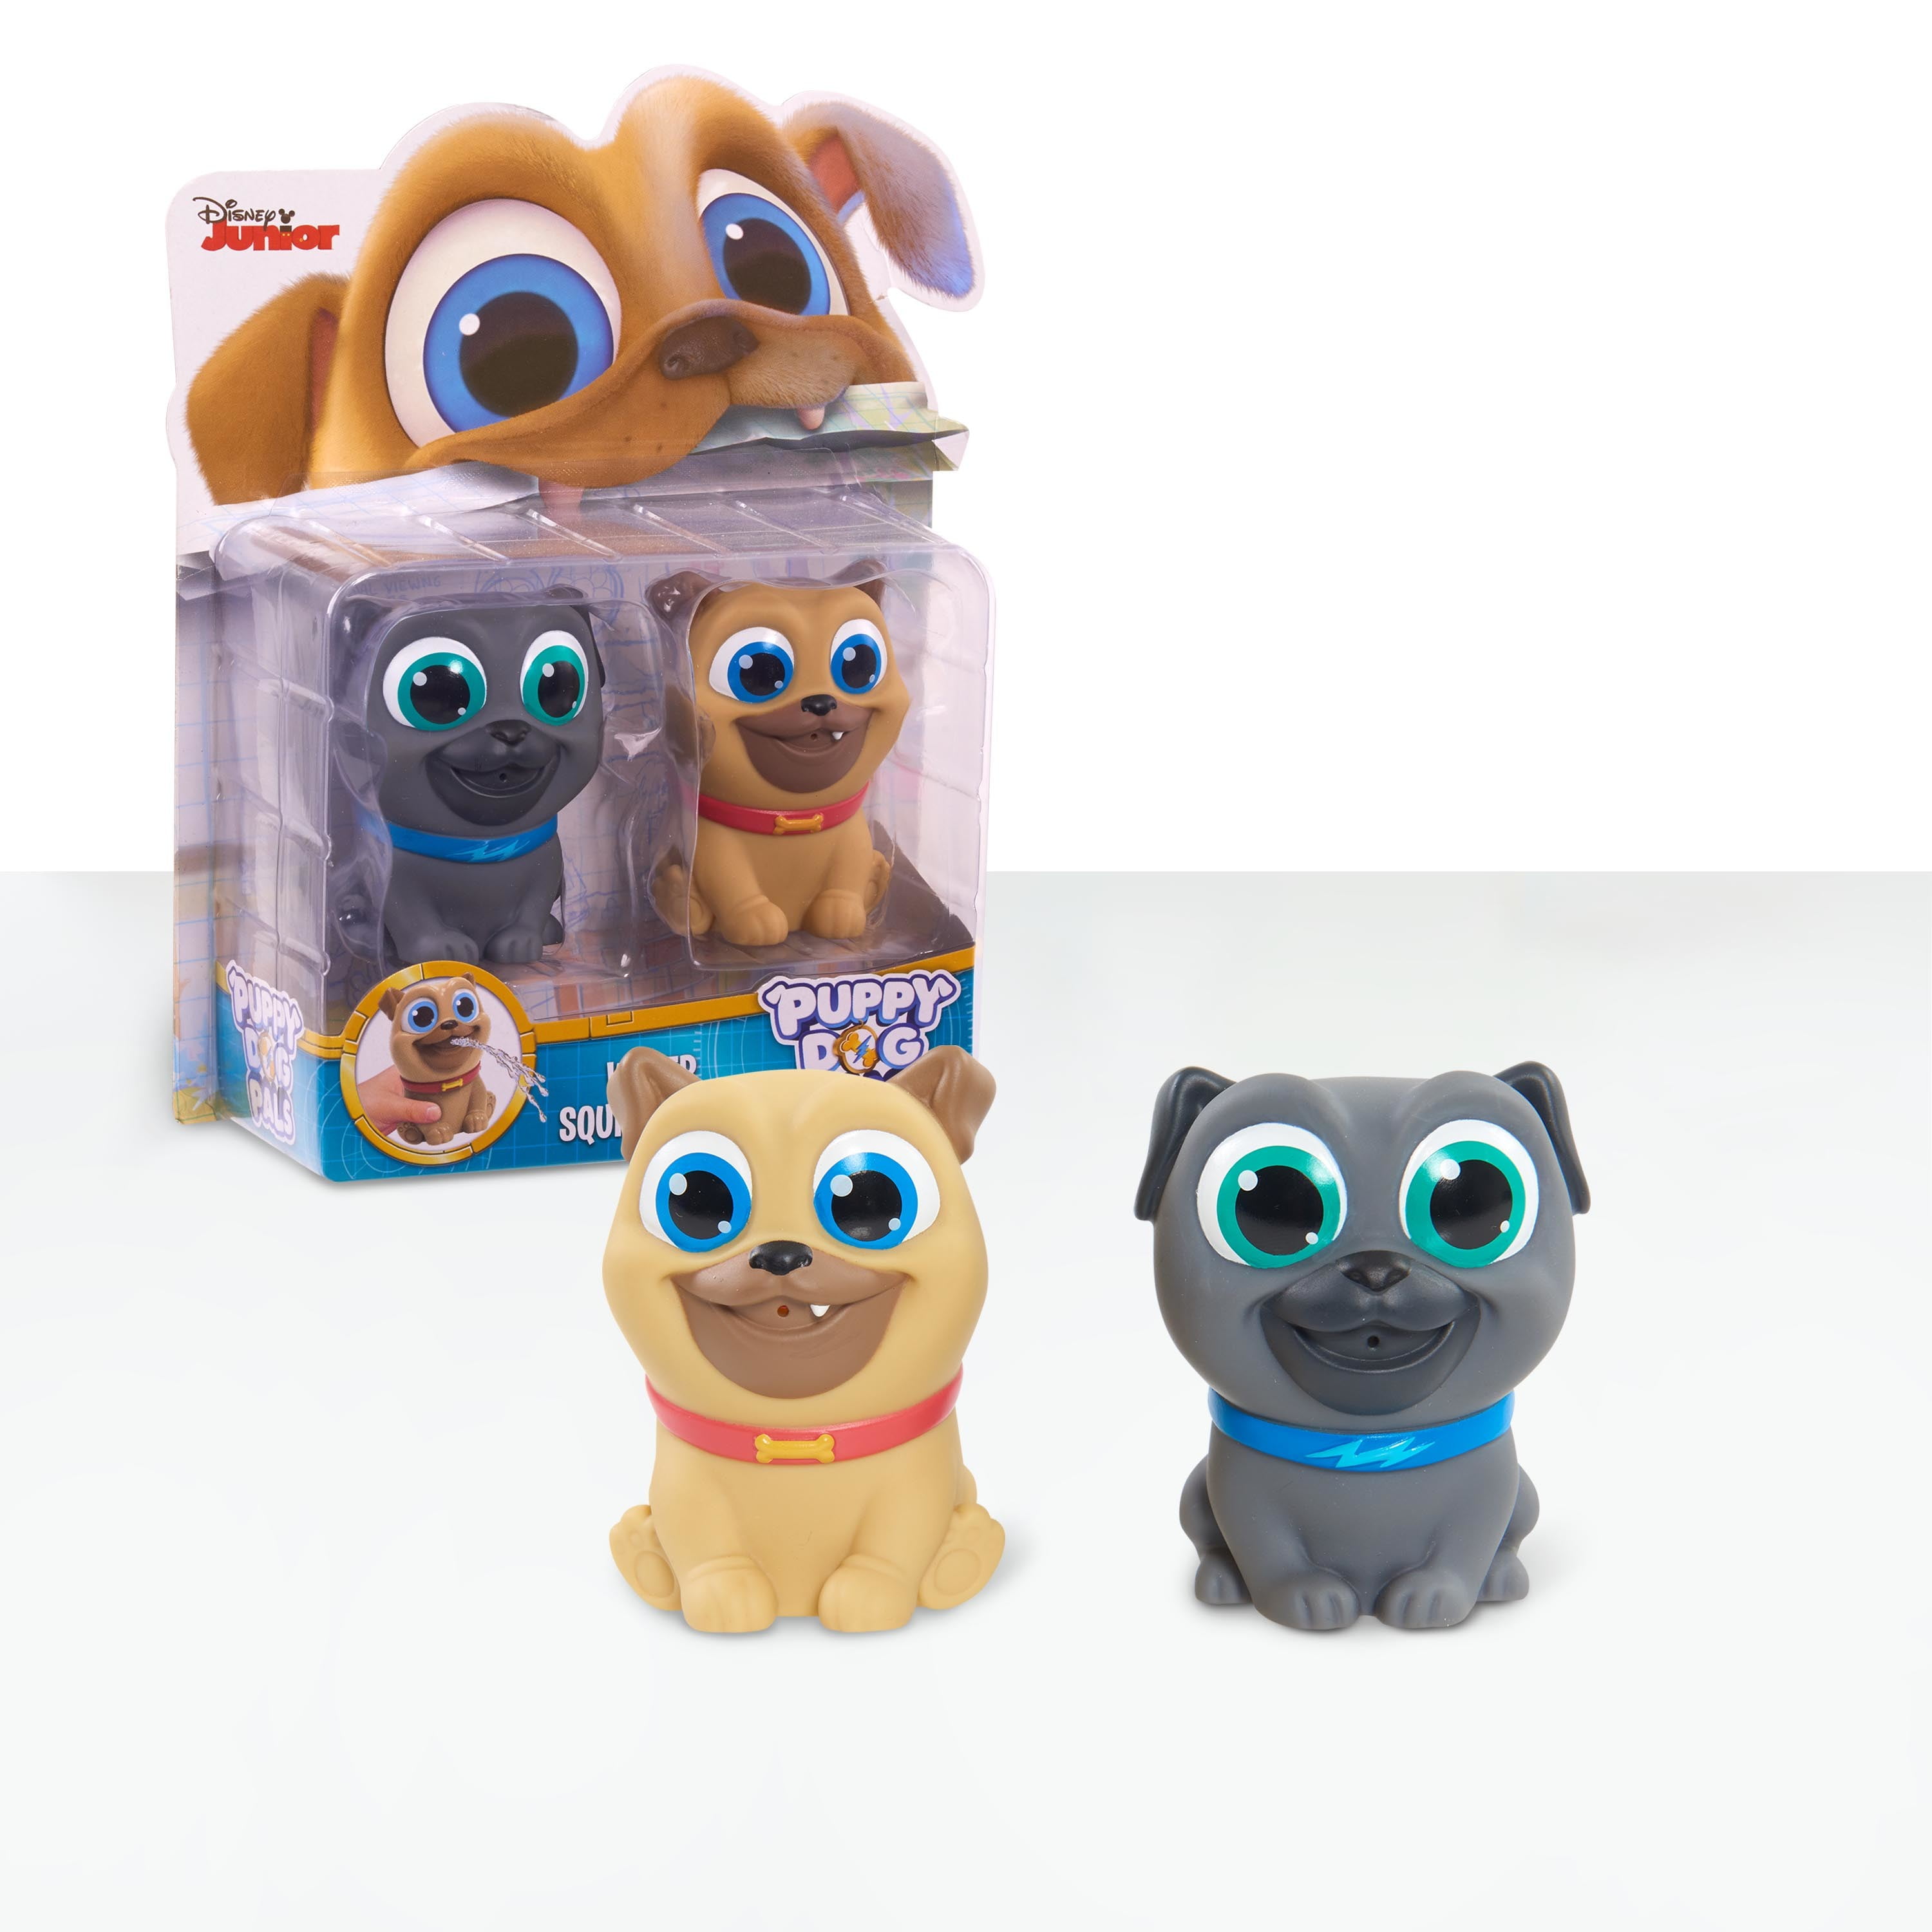 Puppy Dog Pals Bath Toys, Bingo & Rolly 2 Pack, Bath (Fig&Playsets), Ages 3  Up, by Just Play 